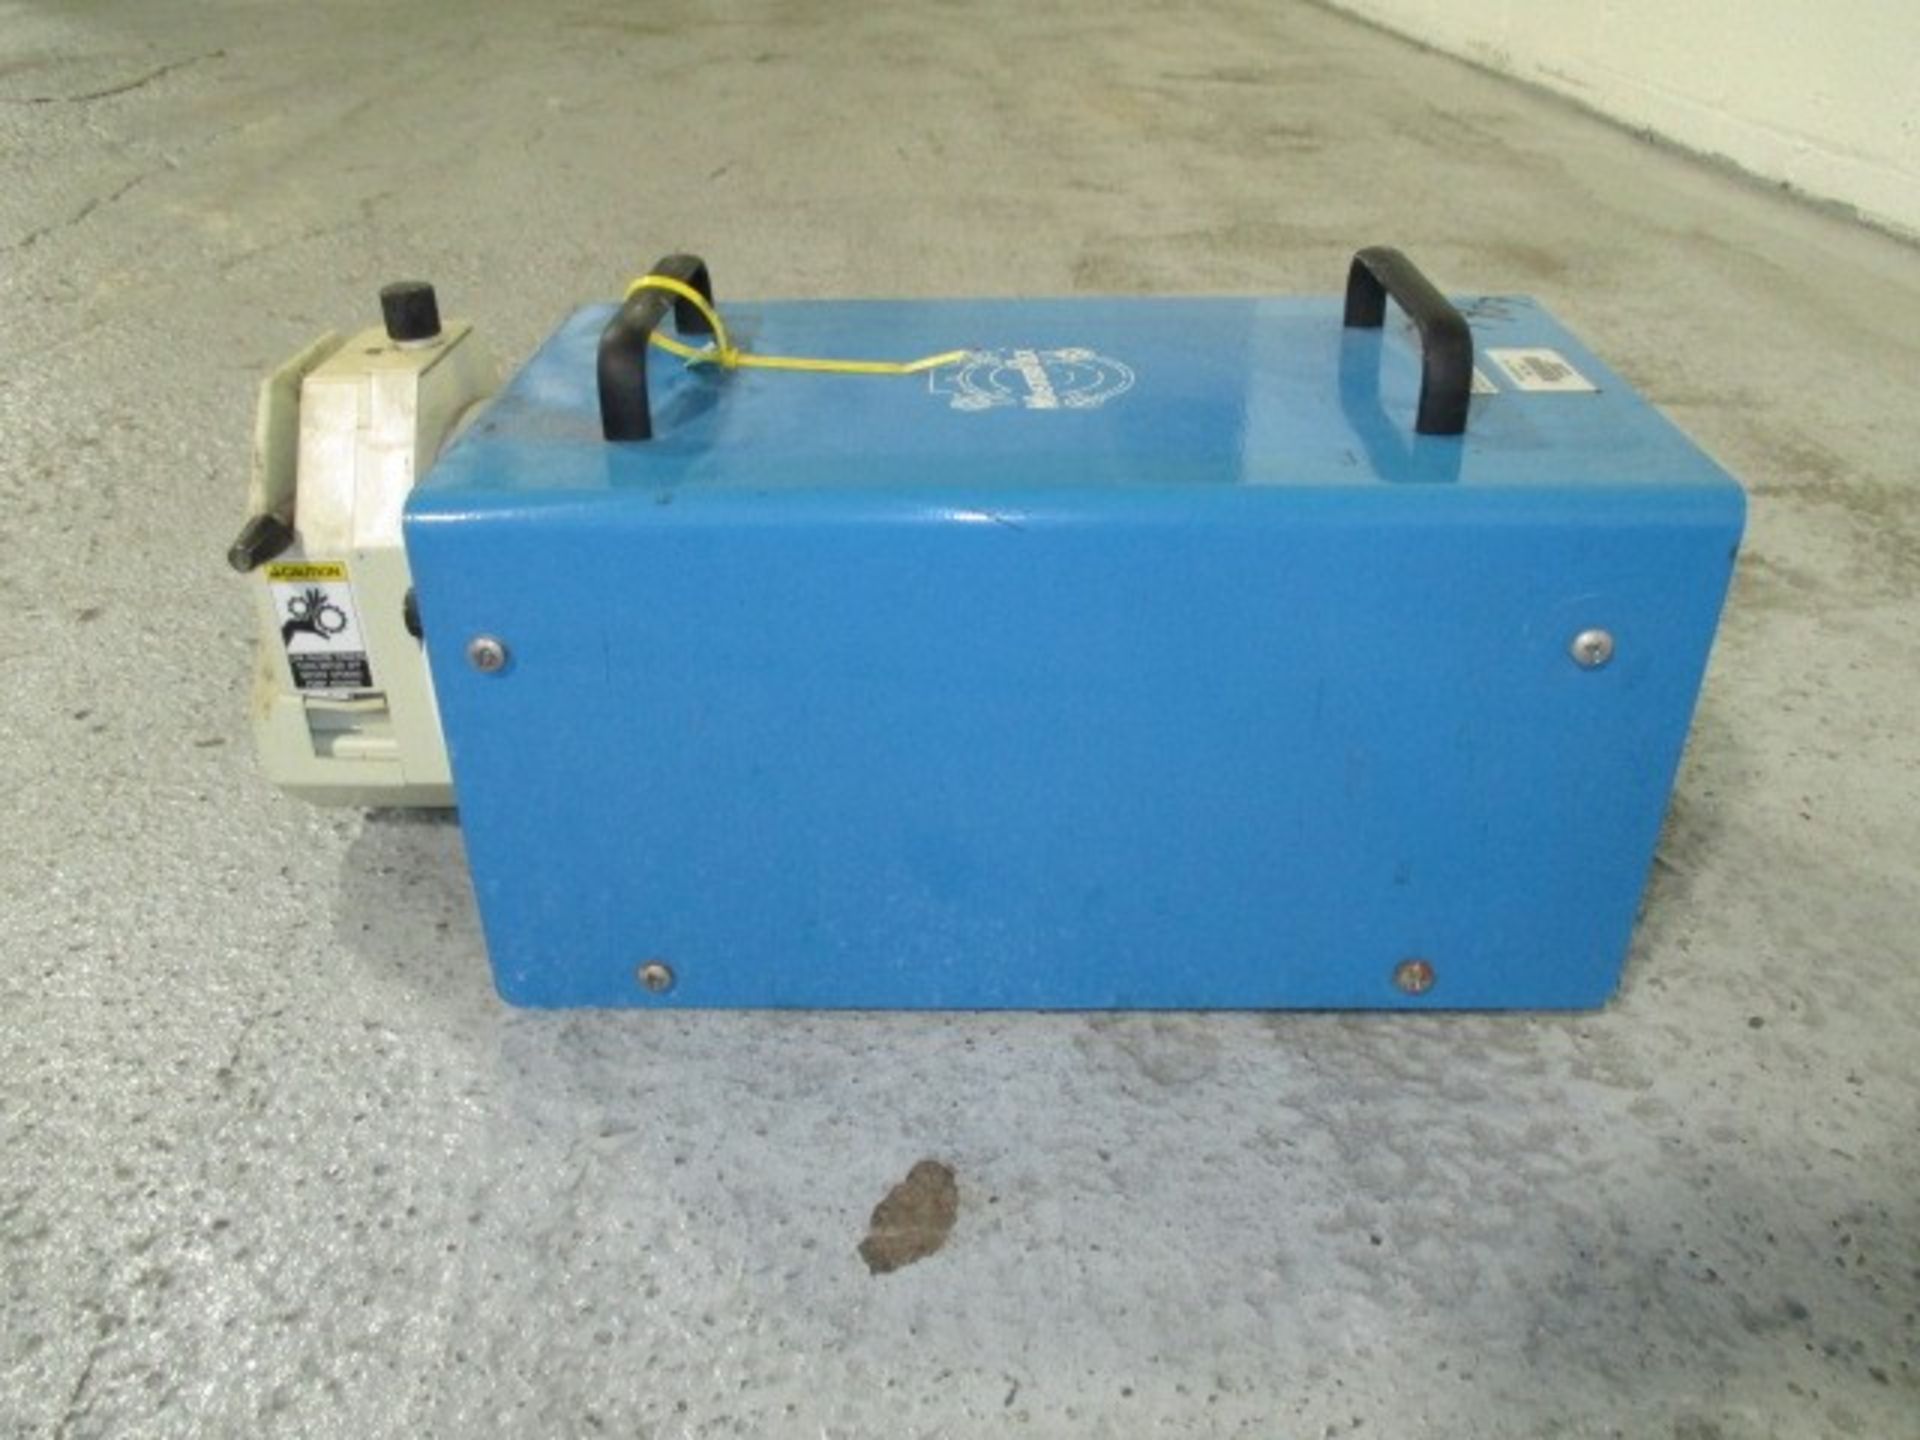 Cole-Parmer peristalic pump, model 7529-10, masterflex design with model 7549-32 variable speed - Image 2 of 8